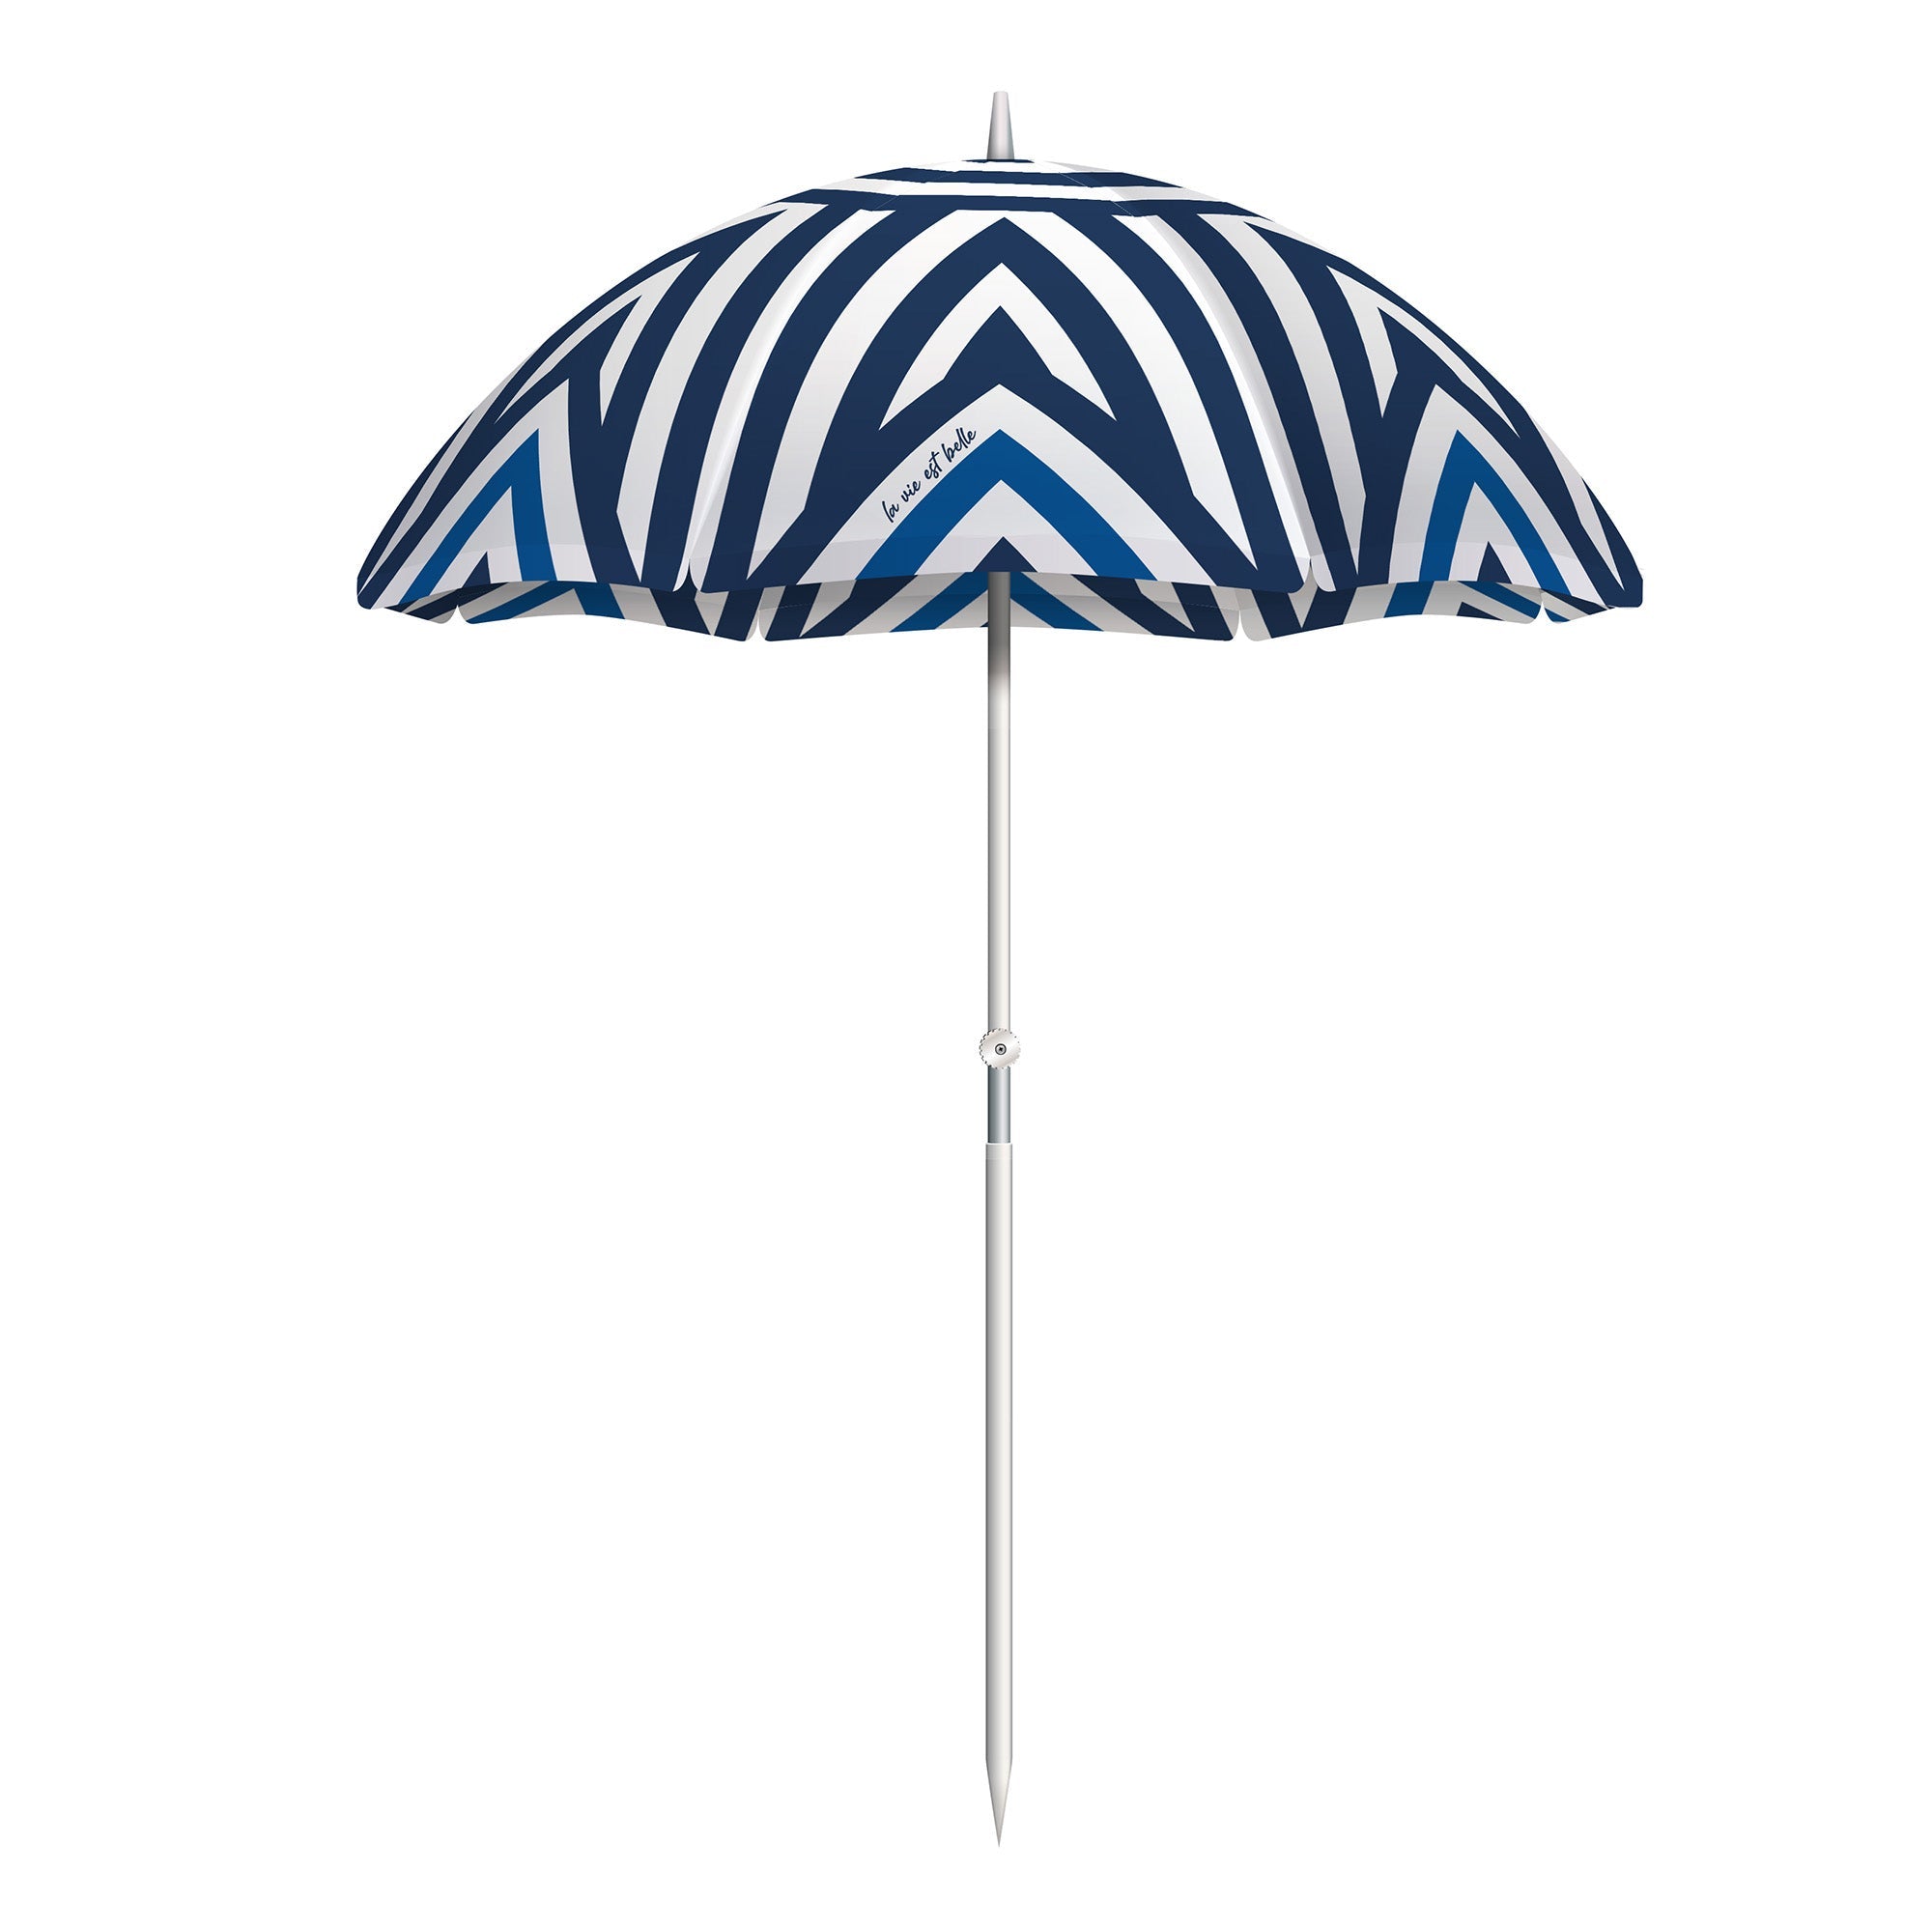 Outdoor and Beach Umbrella Géo Print 100% Polyester with Transport Bag Open 67x75in  170x190cm